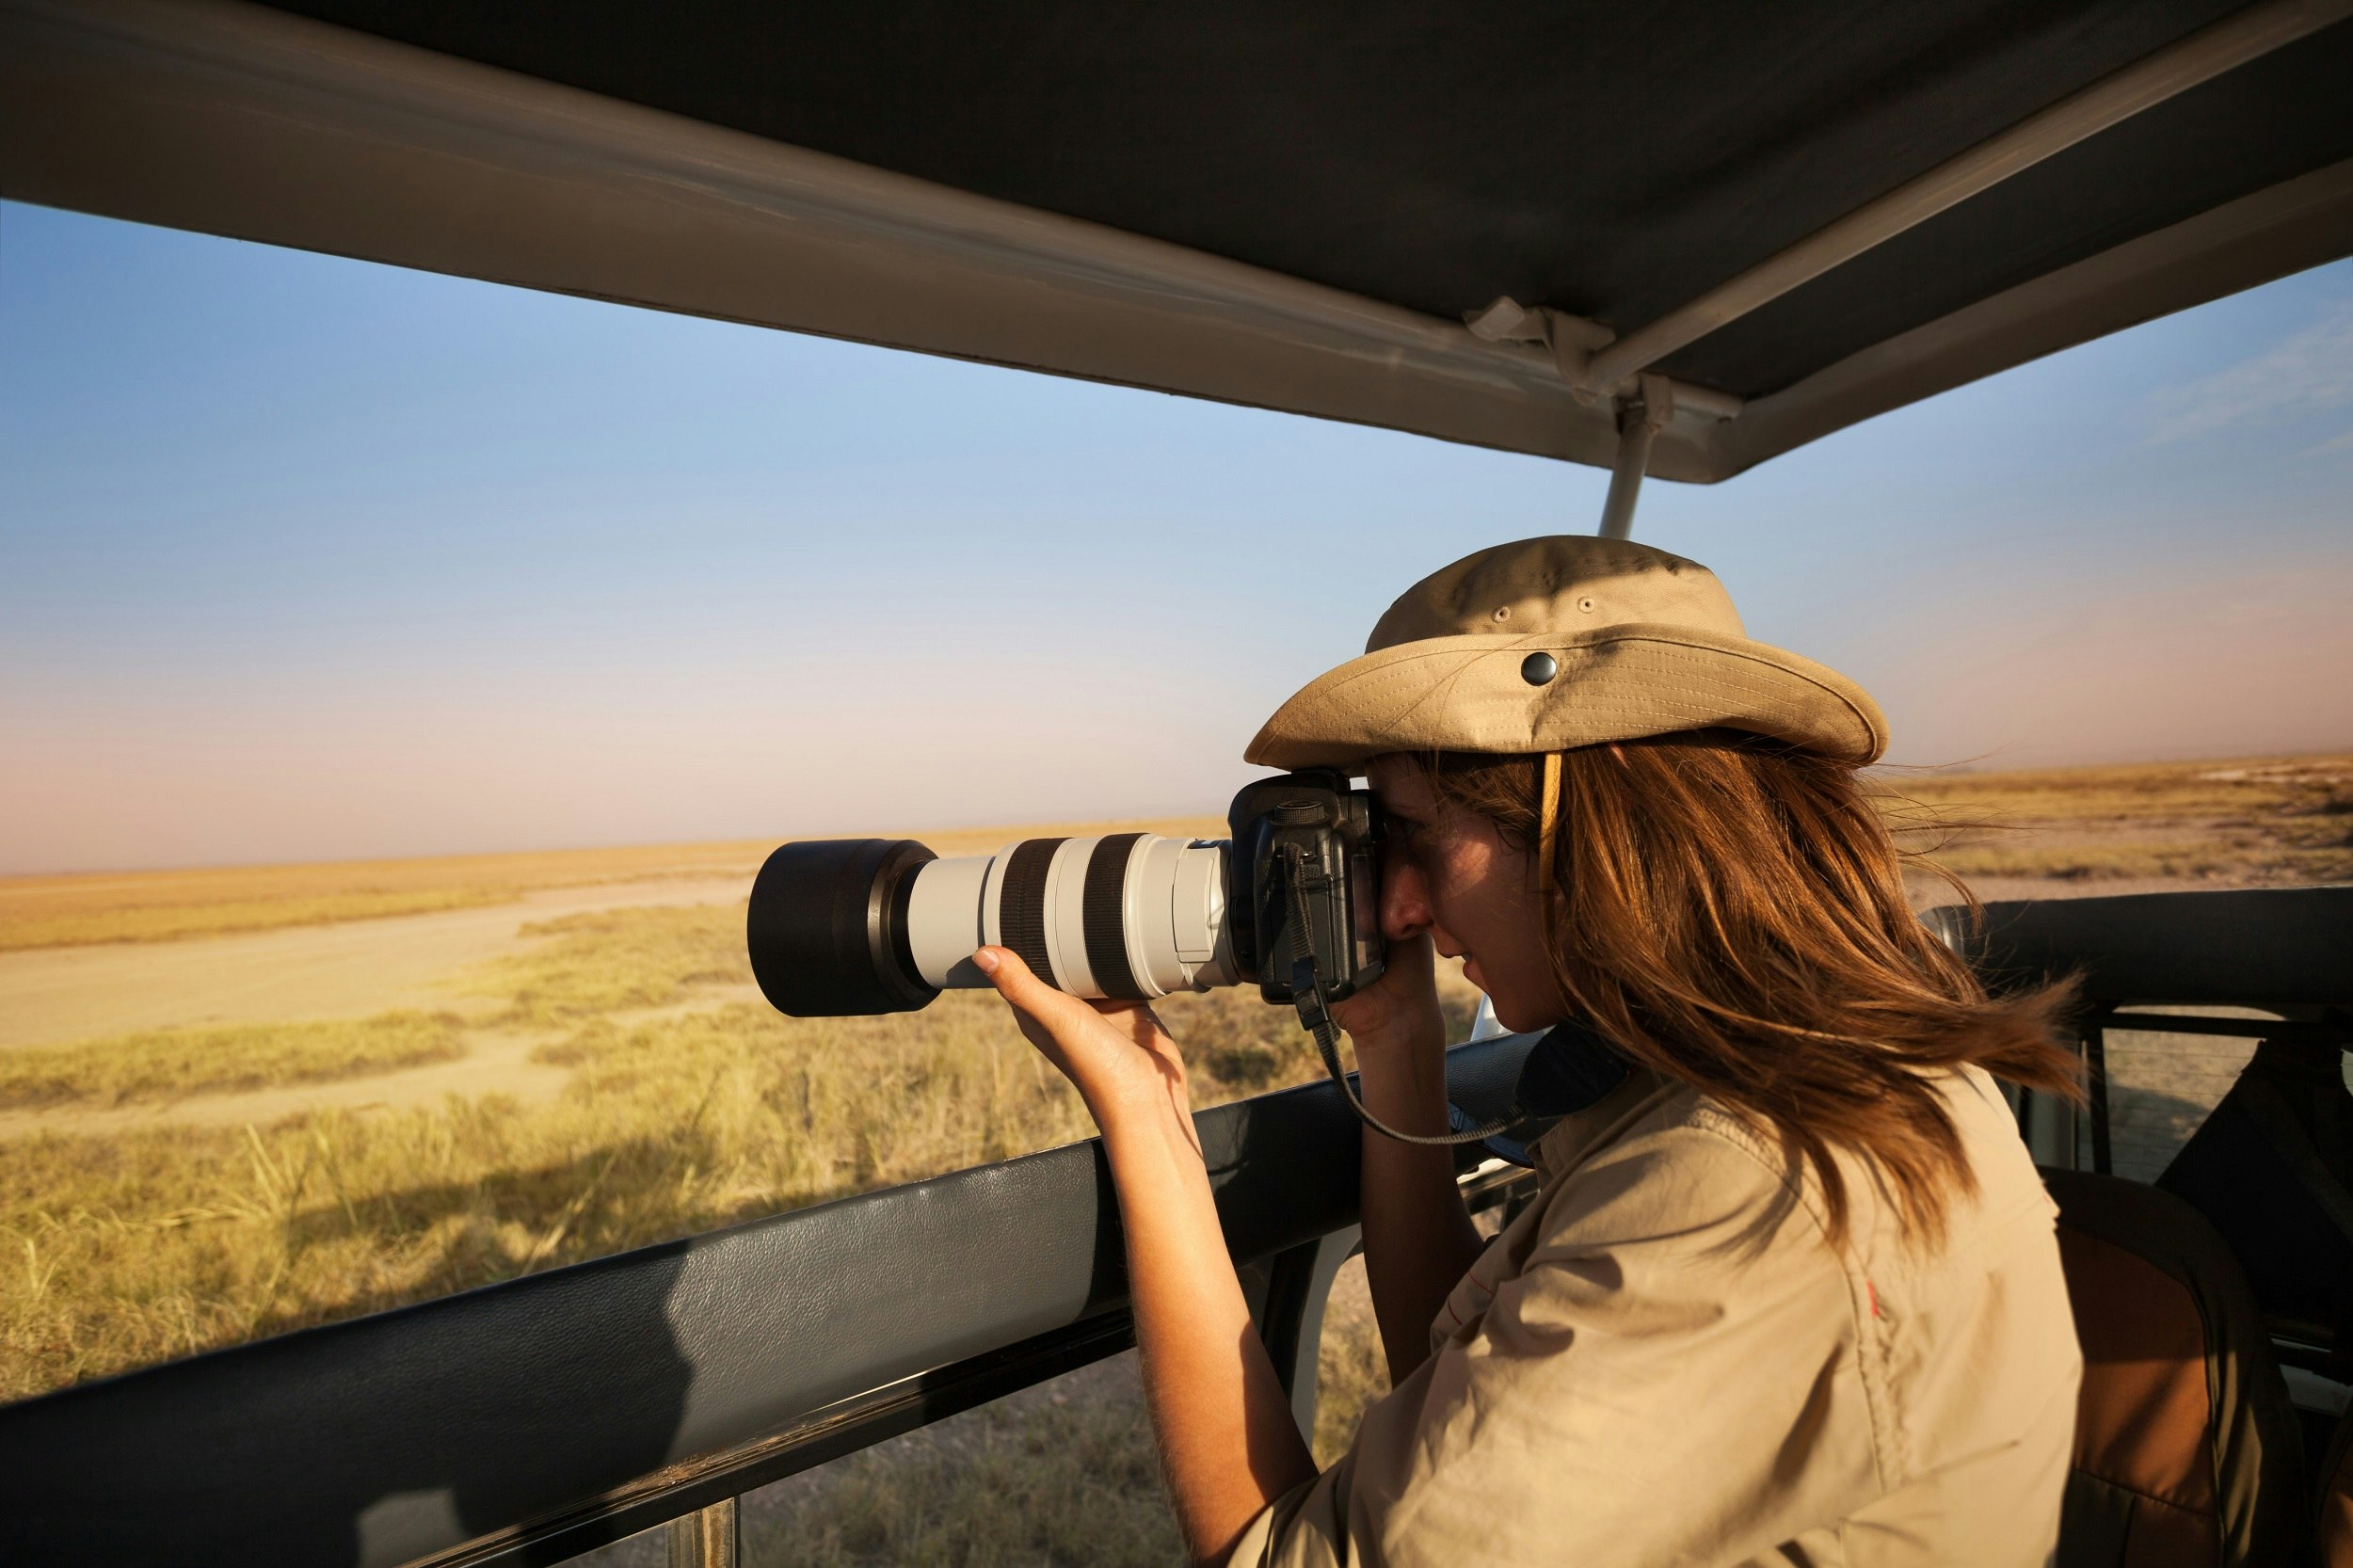 A woman tourist taking photo of savannah with a professional camera aboard safari jeep in Amboseli National Park; the truck has a pop-up roof, so she is standing in the jeep with the roof above her head.